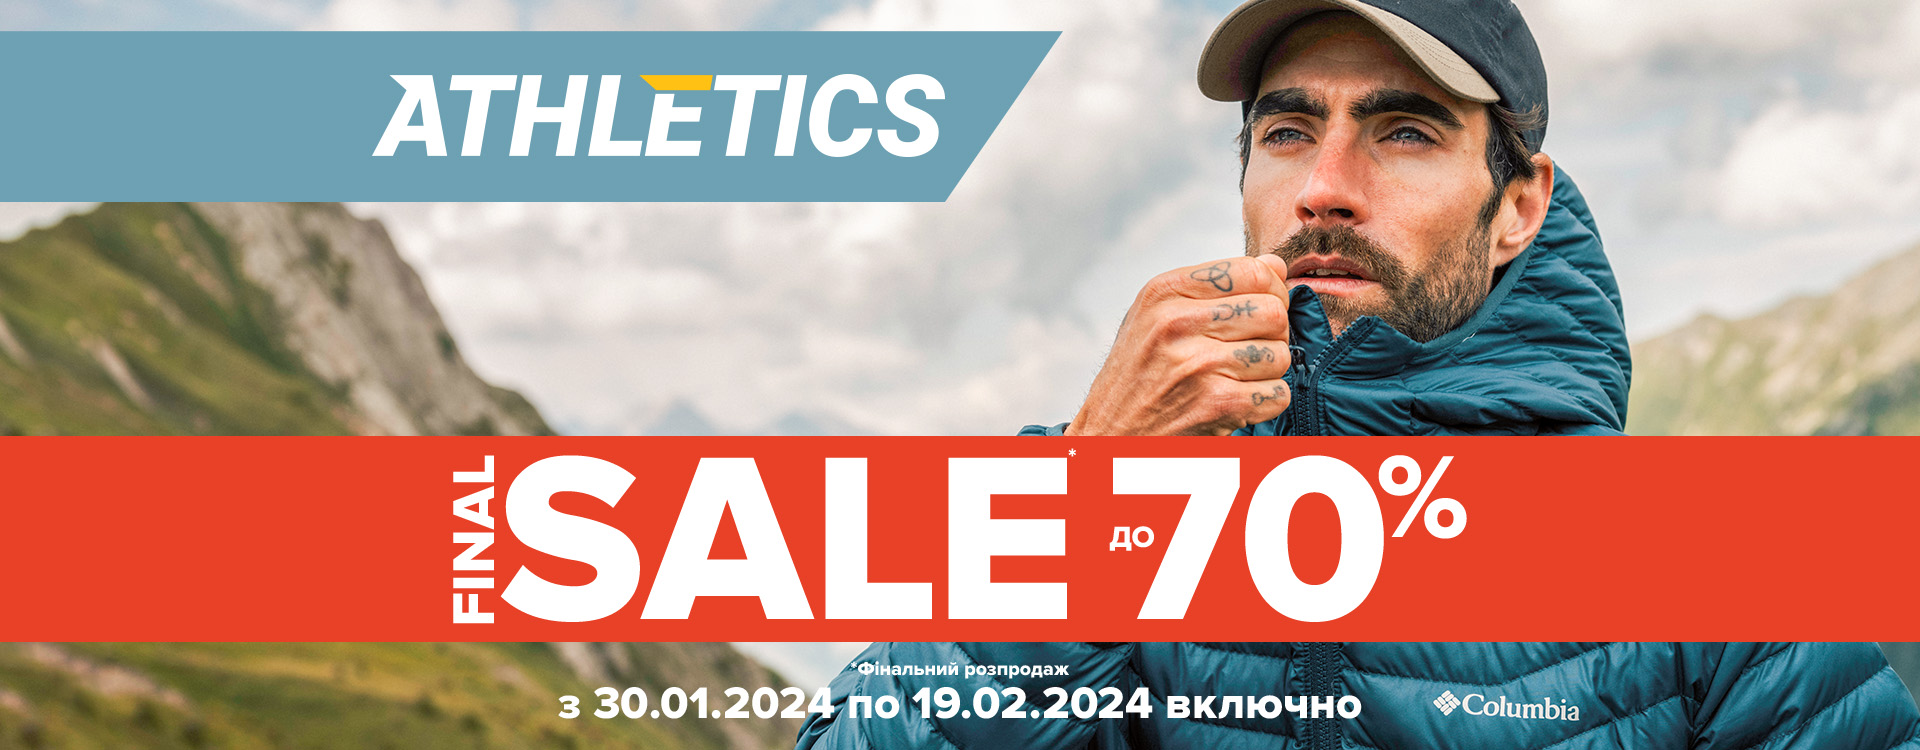 Final sale up to 70% off at ATHLETICS